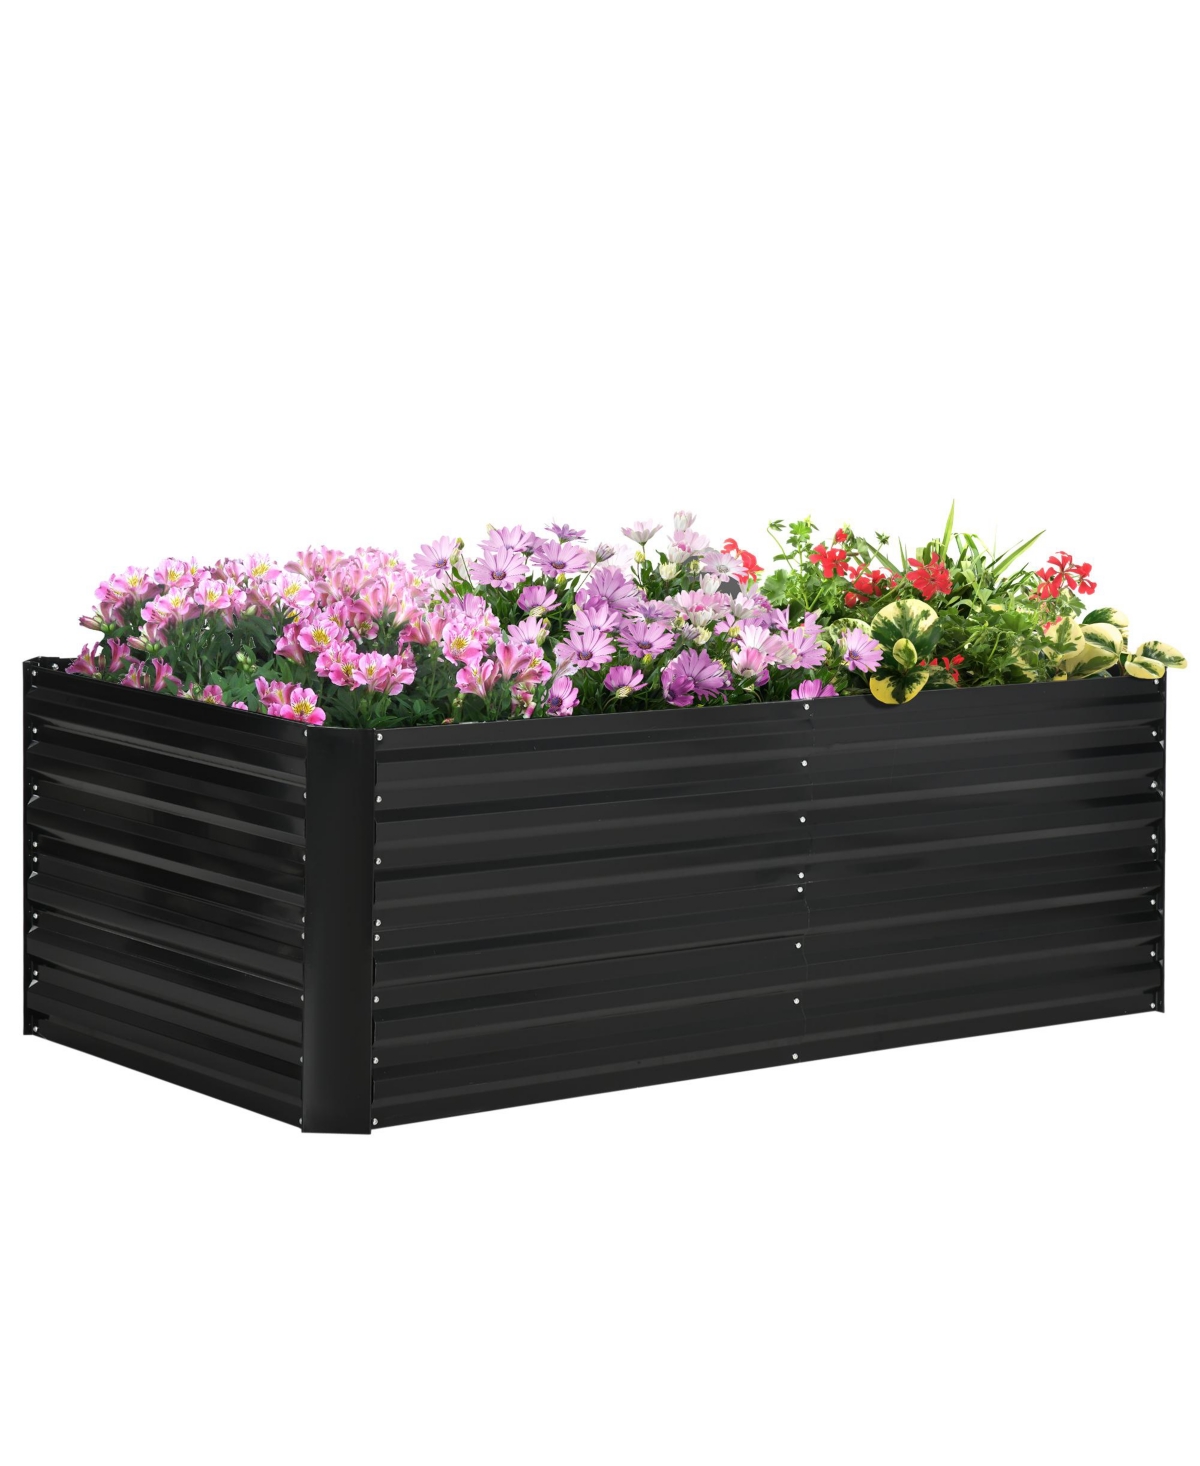 Raised Garden Bed, 71" x 36" x 23" Galvanized Steel Planters for Outdoor Plants with Reinforced Rods for Vegetables, Flowers, and Herbs, Blac